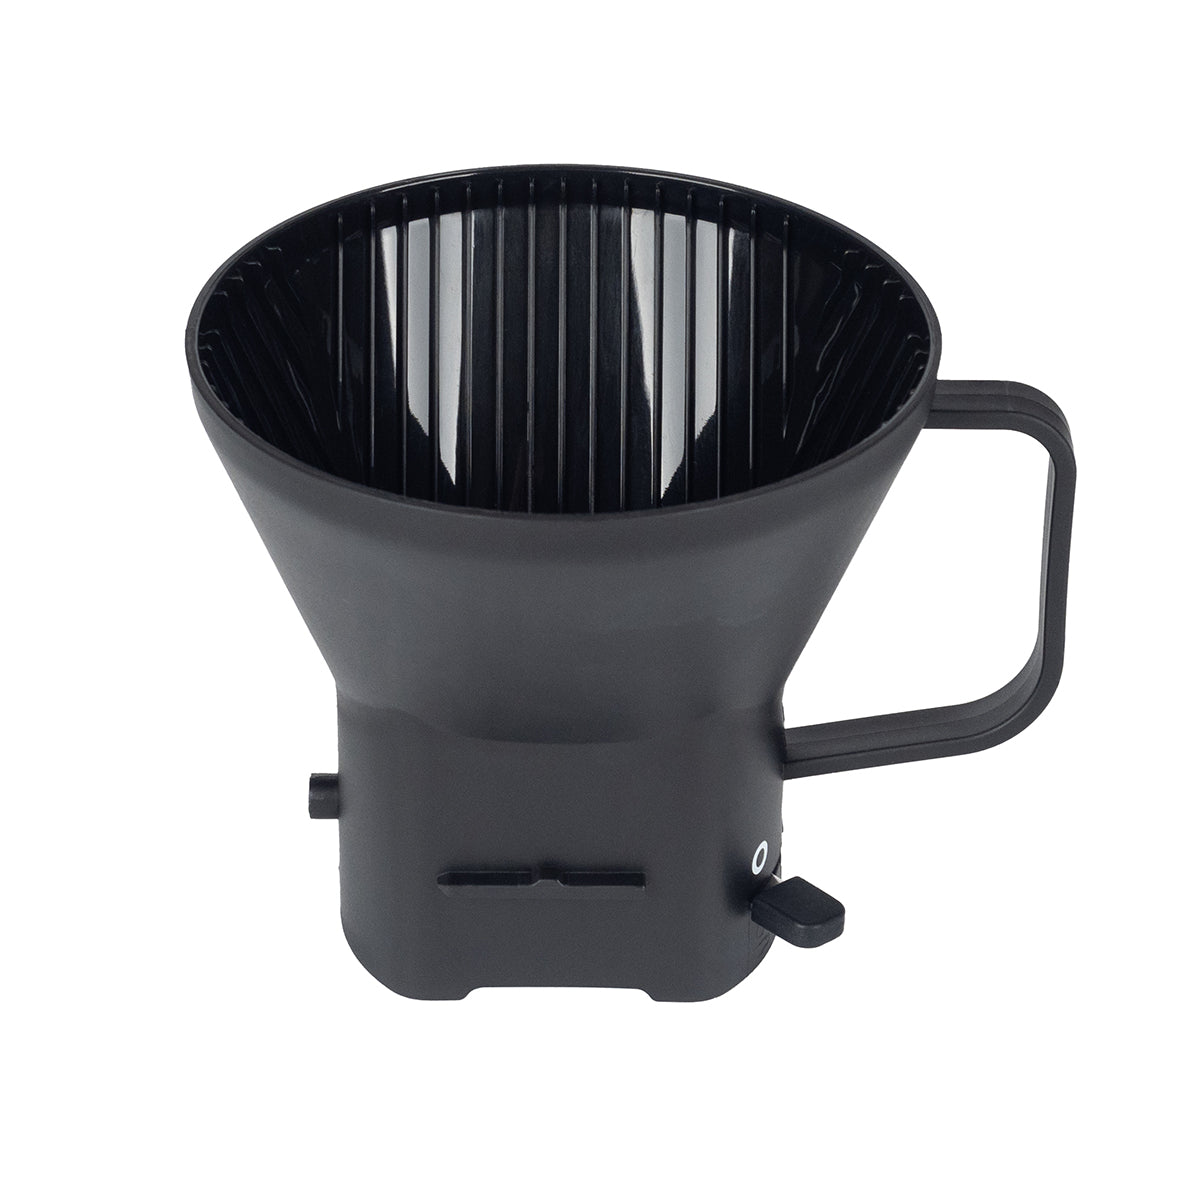 Parts & Accessories - Filter Basket with Lid